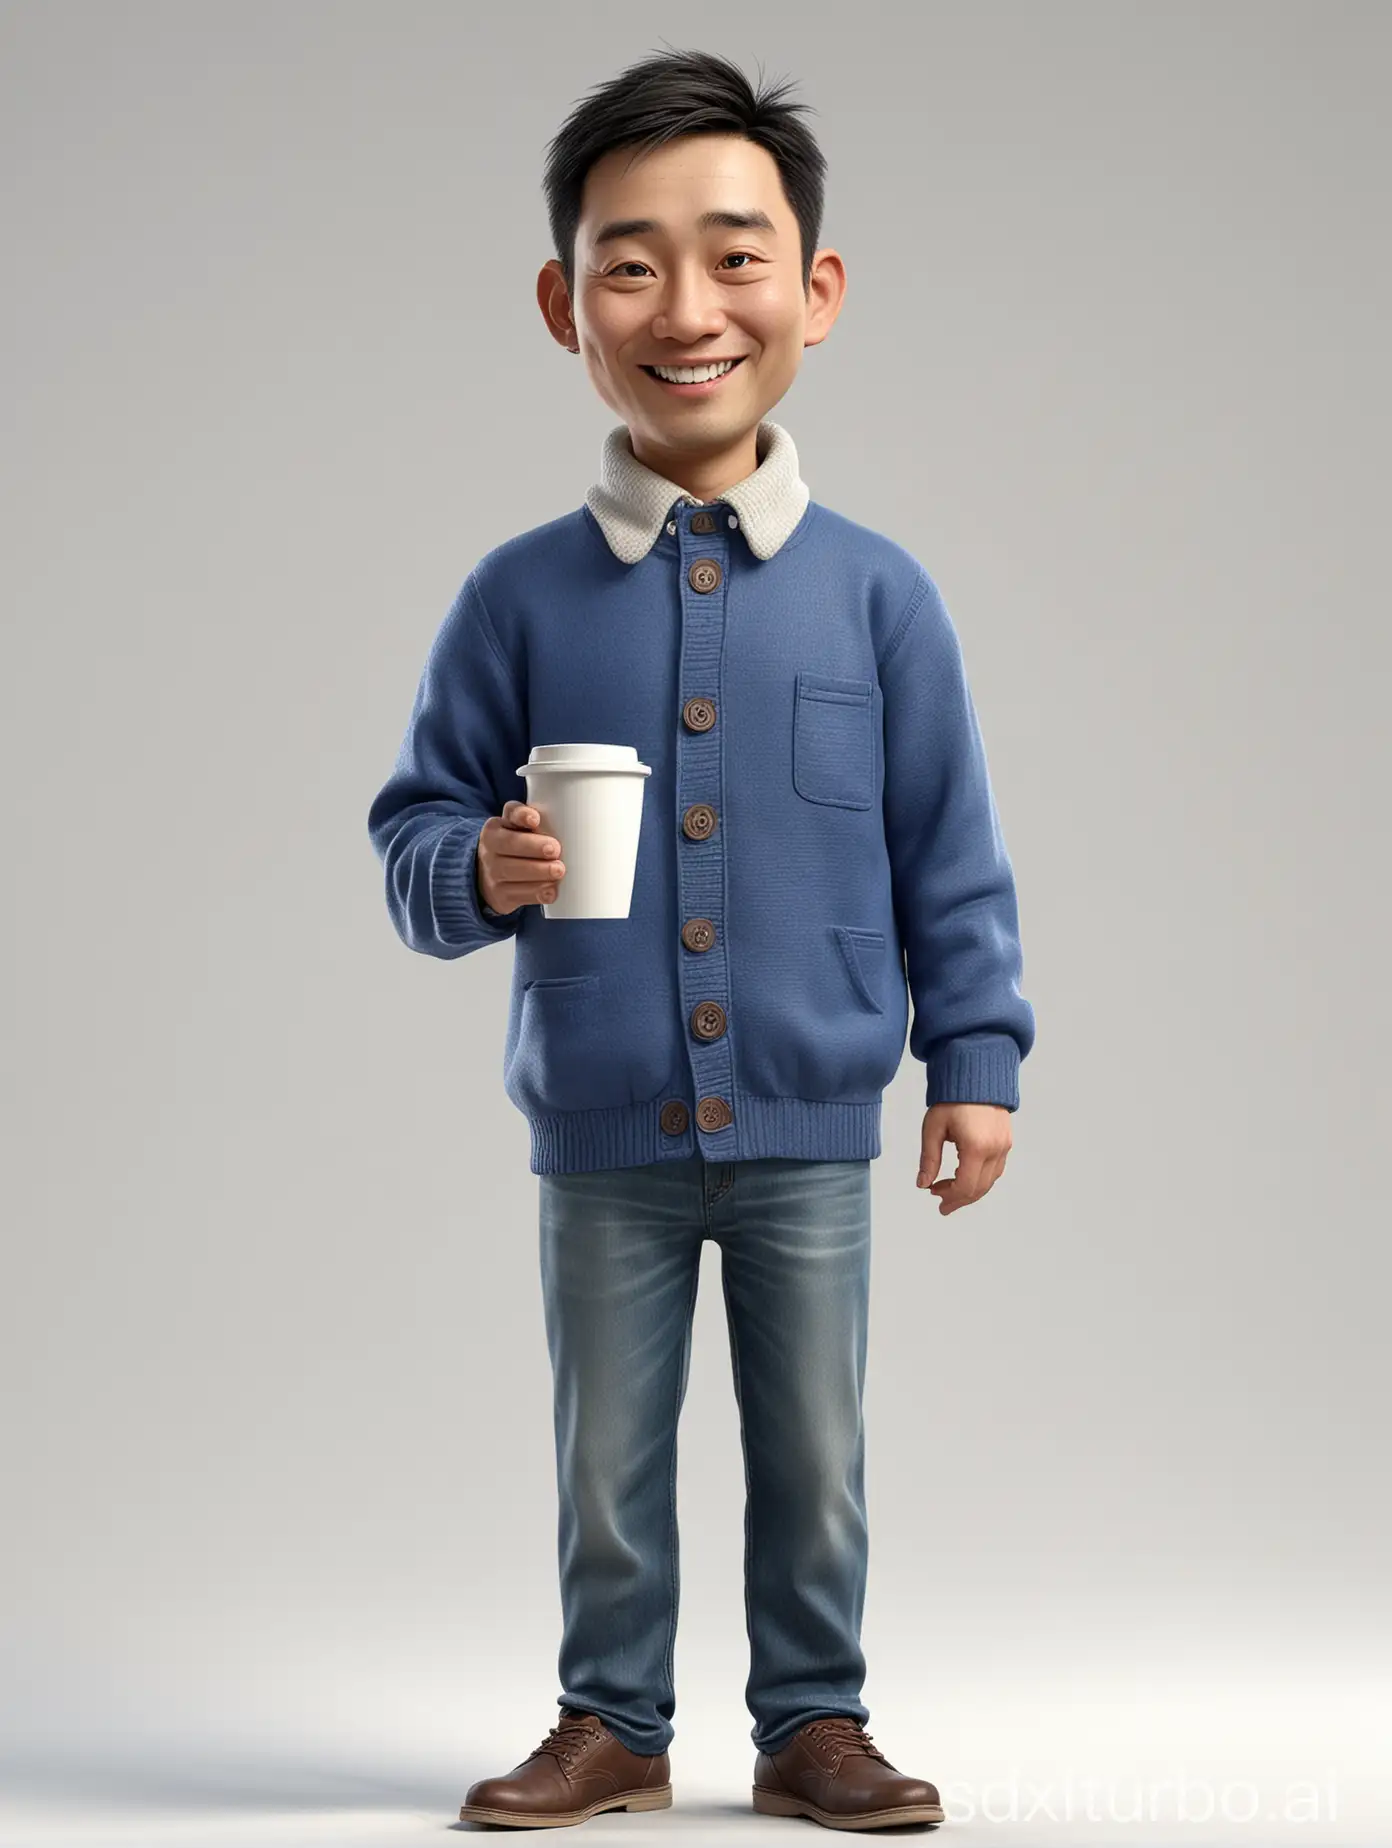 Full body, Caricature of chinese man, medium body size, thin hair, smiling expression, standing, holding a cup filled with coffee, wearing a blue sweater jacket, white background. Big head size. Realistic. 3D. HD